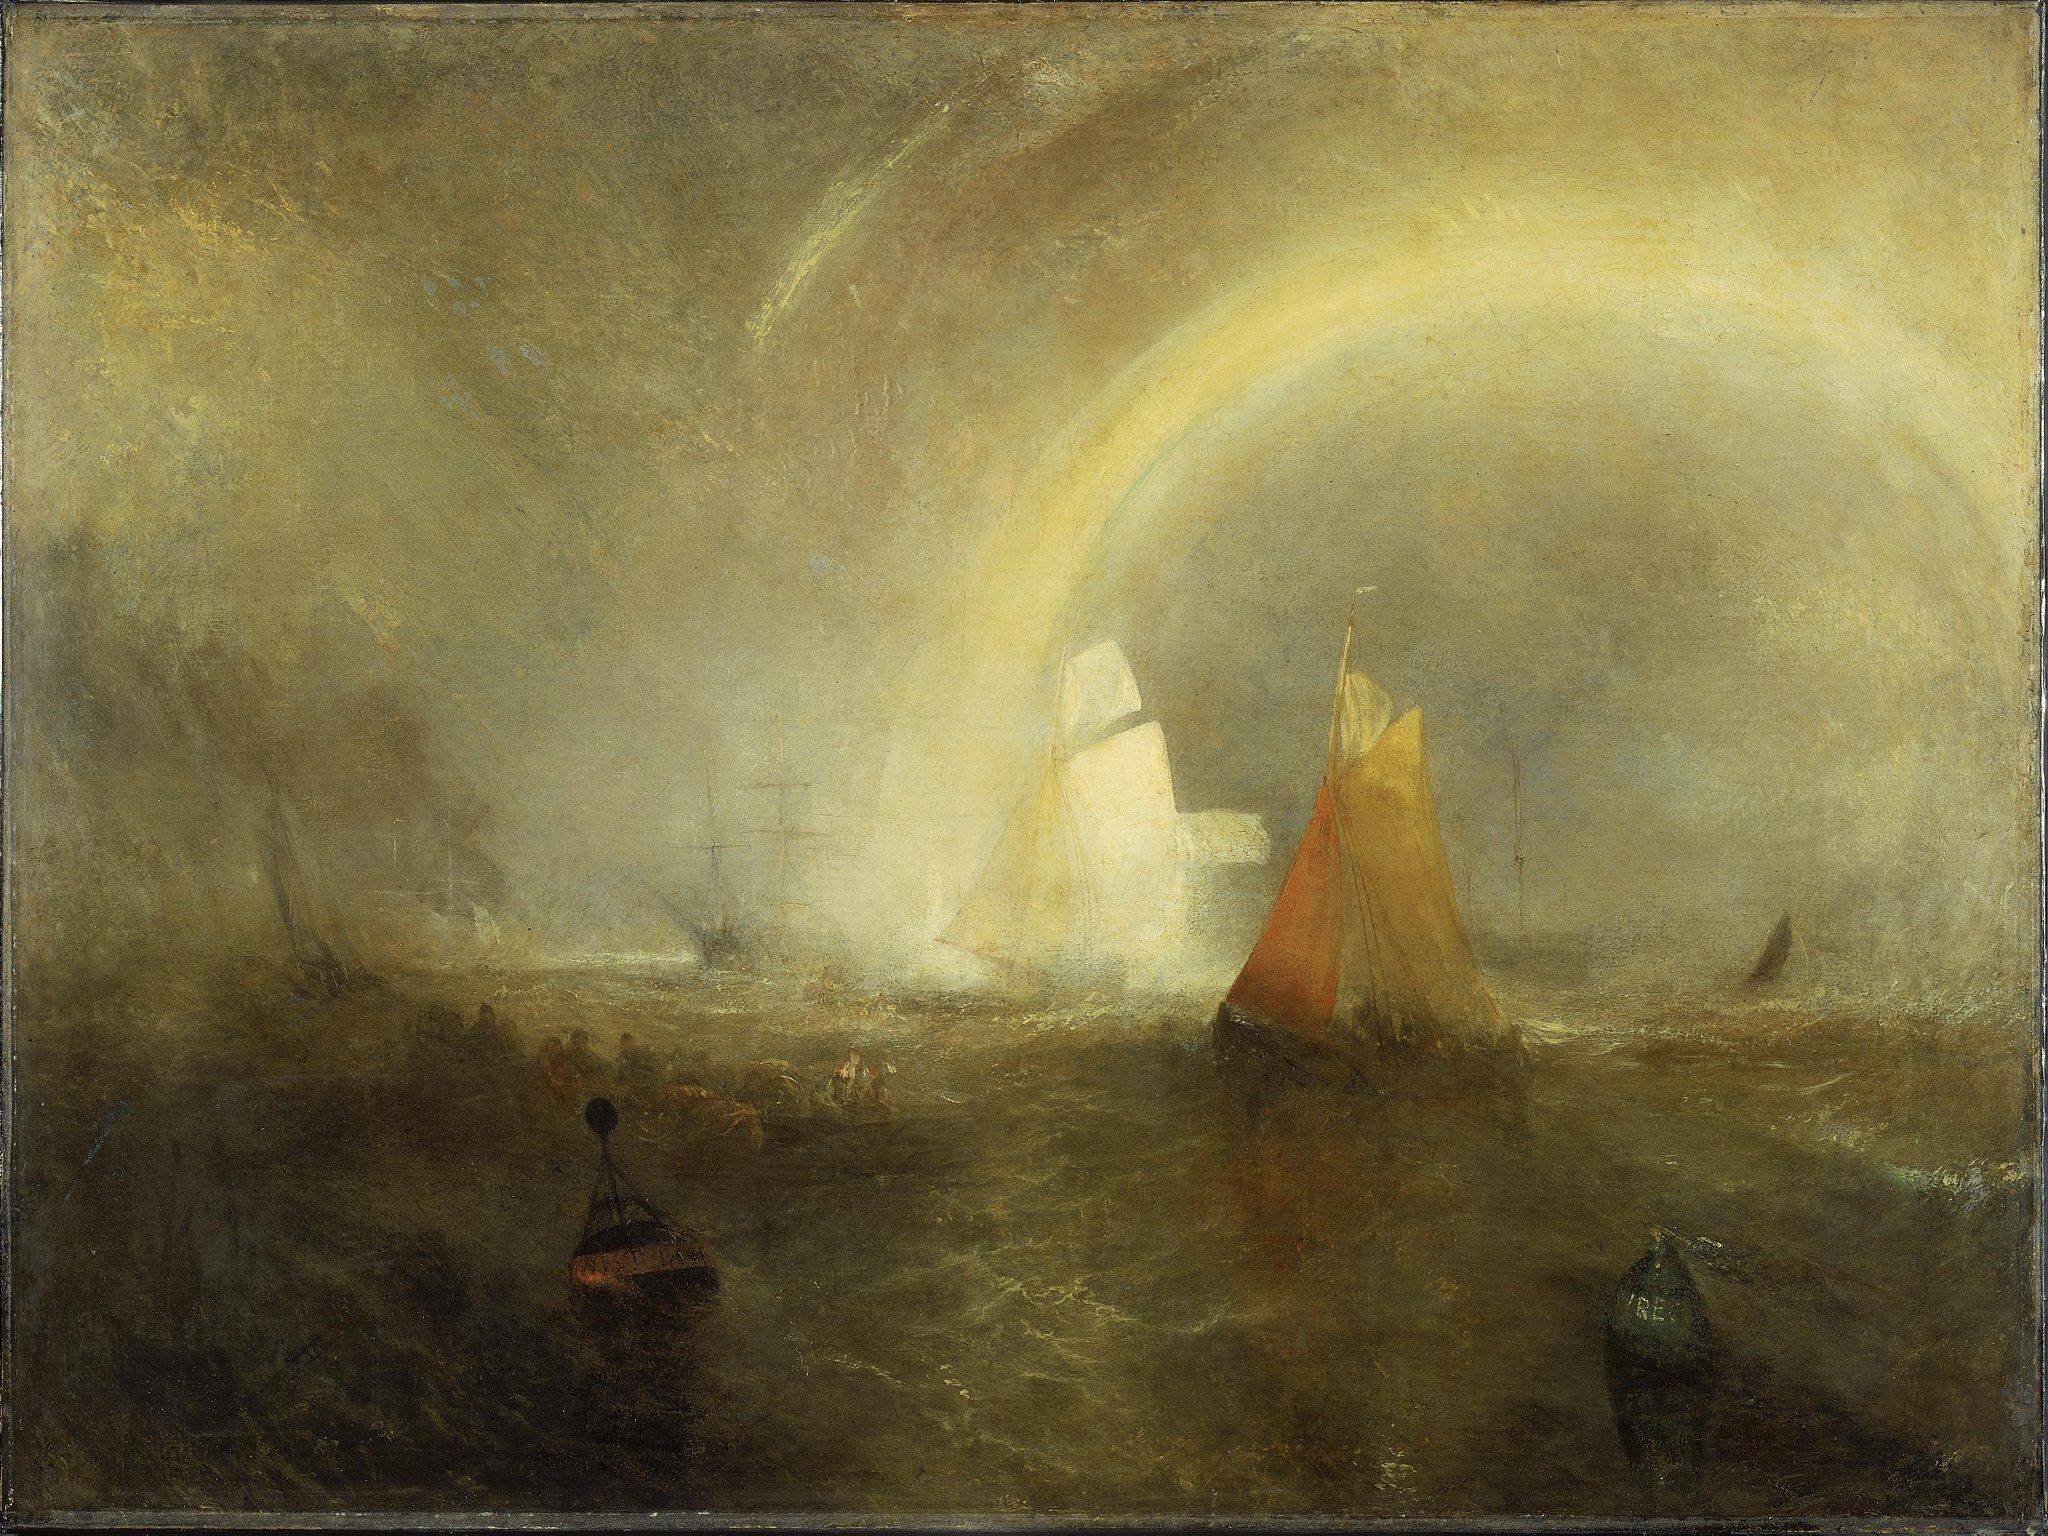 The Wreck Buoy By Joseph Mallord William Turner (1775 1851)